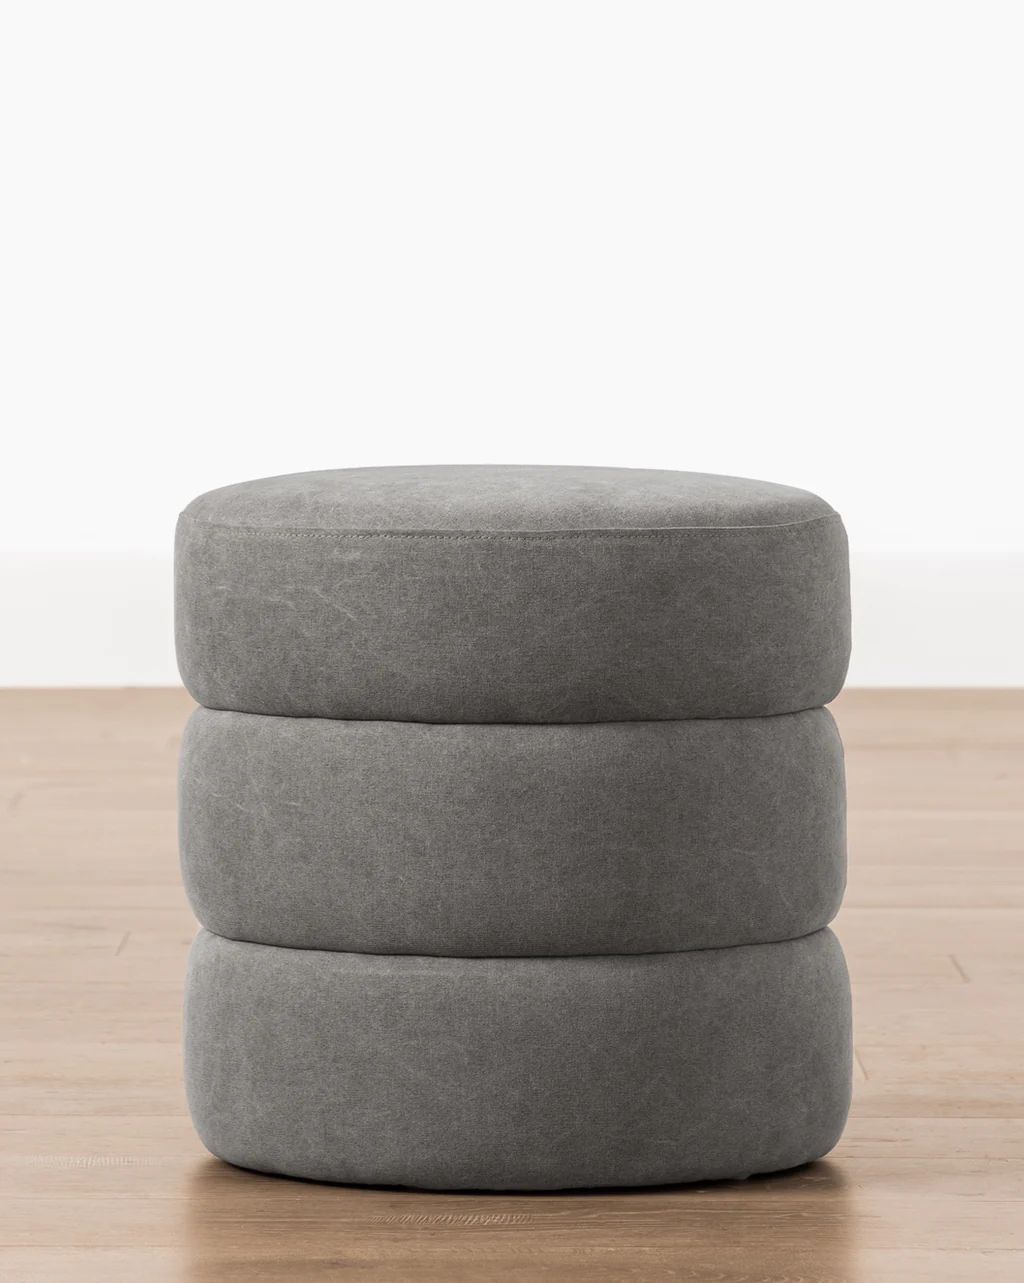 Channel Ottoman | McGee & Co.